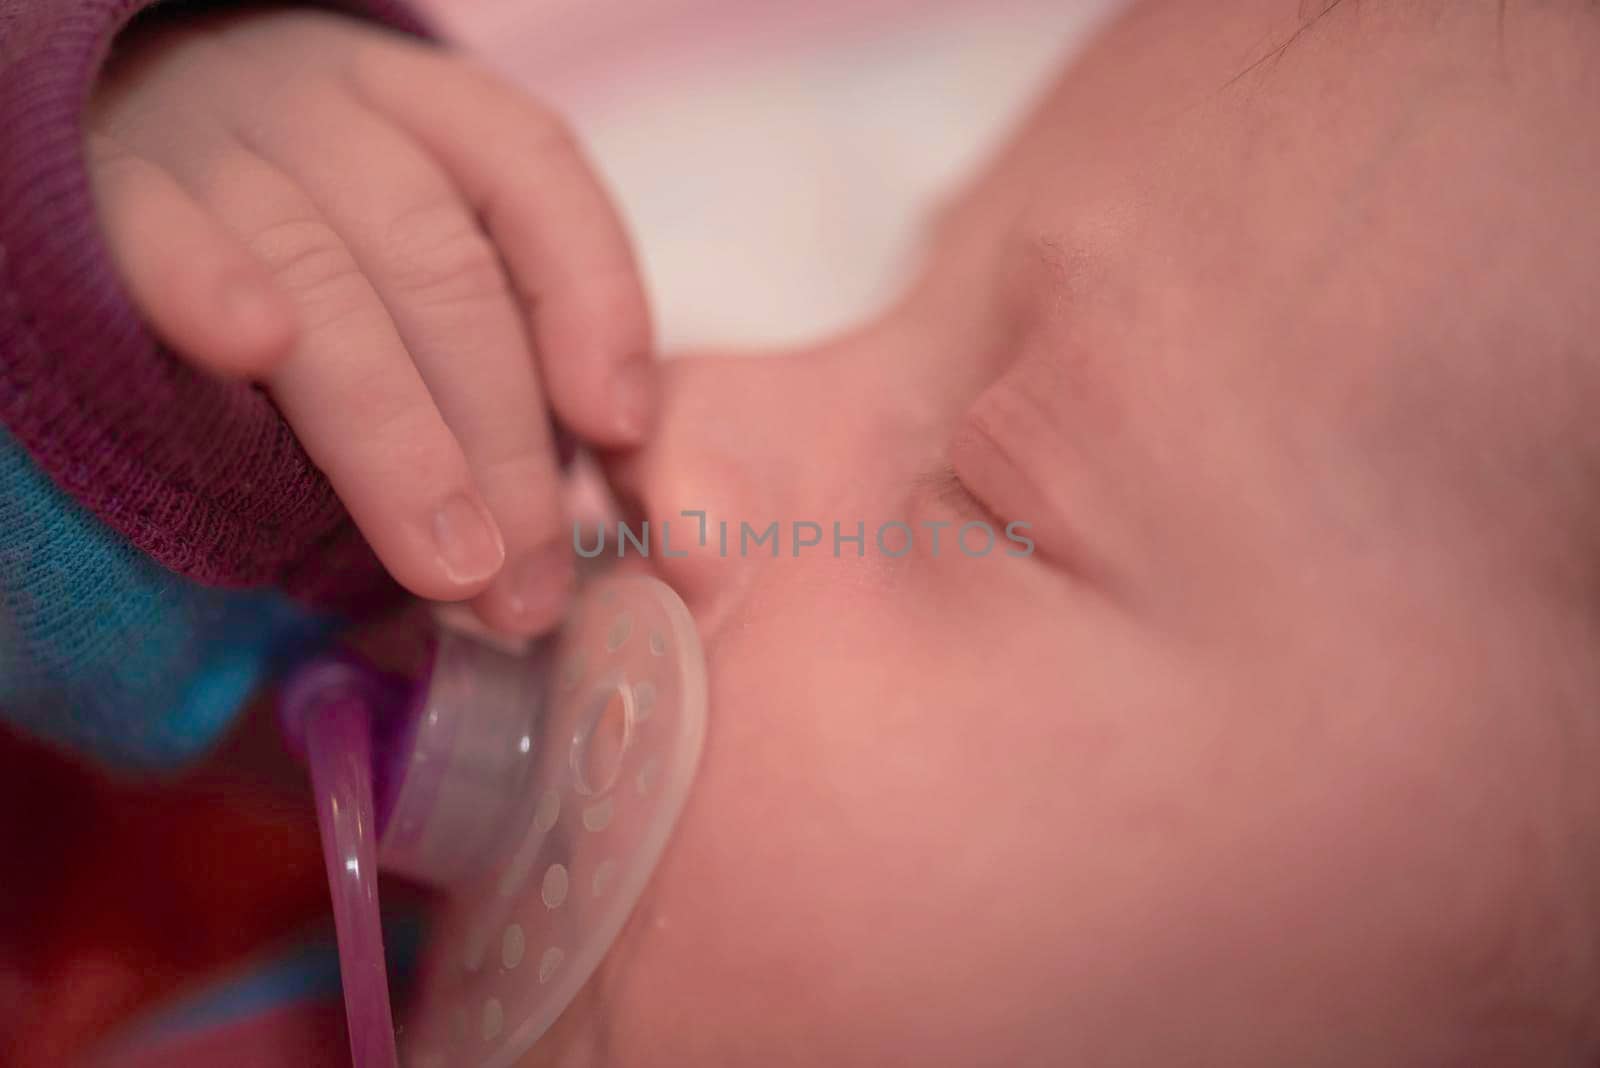 One month newborn baby in bed. Close up portrait of sleeping cute little girl